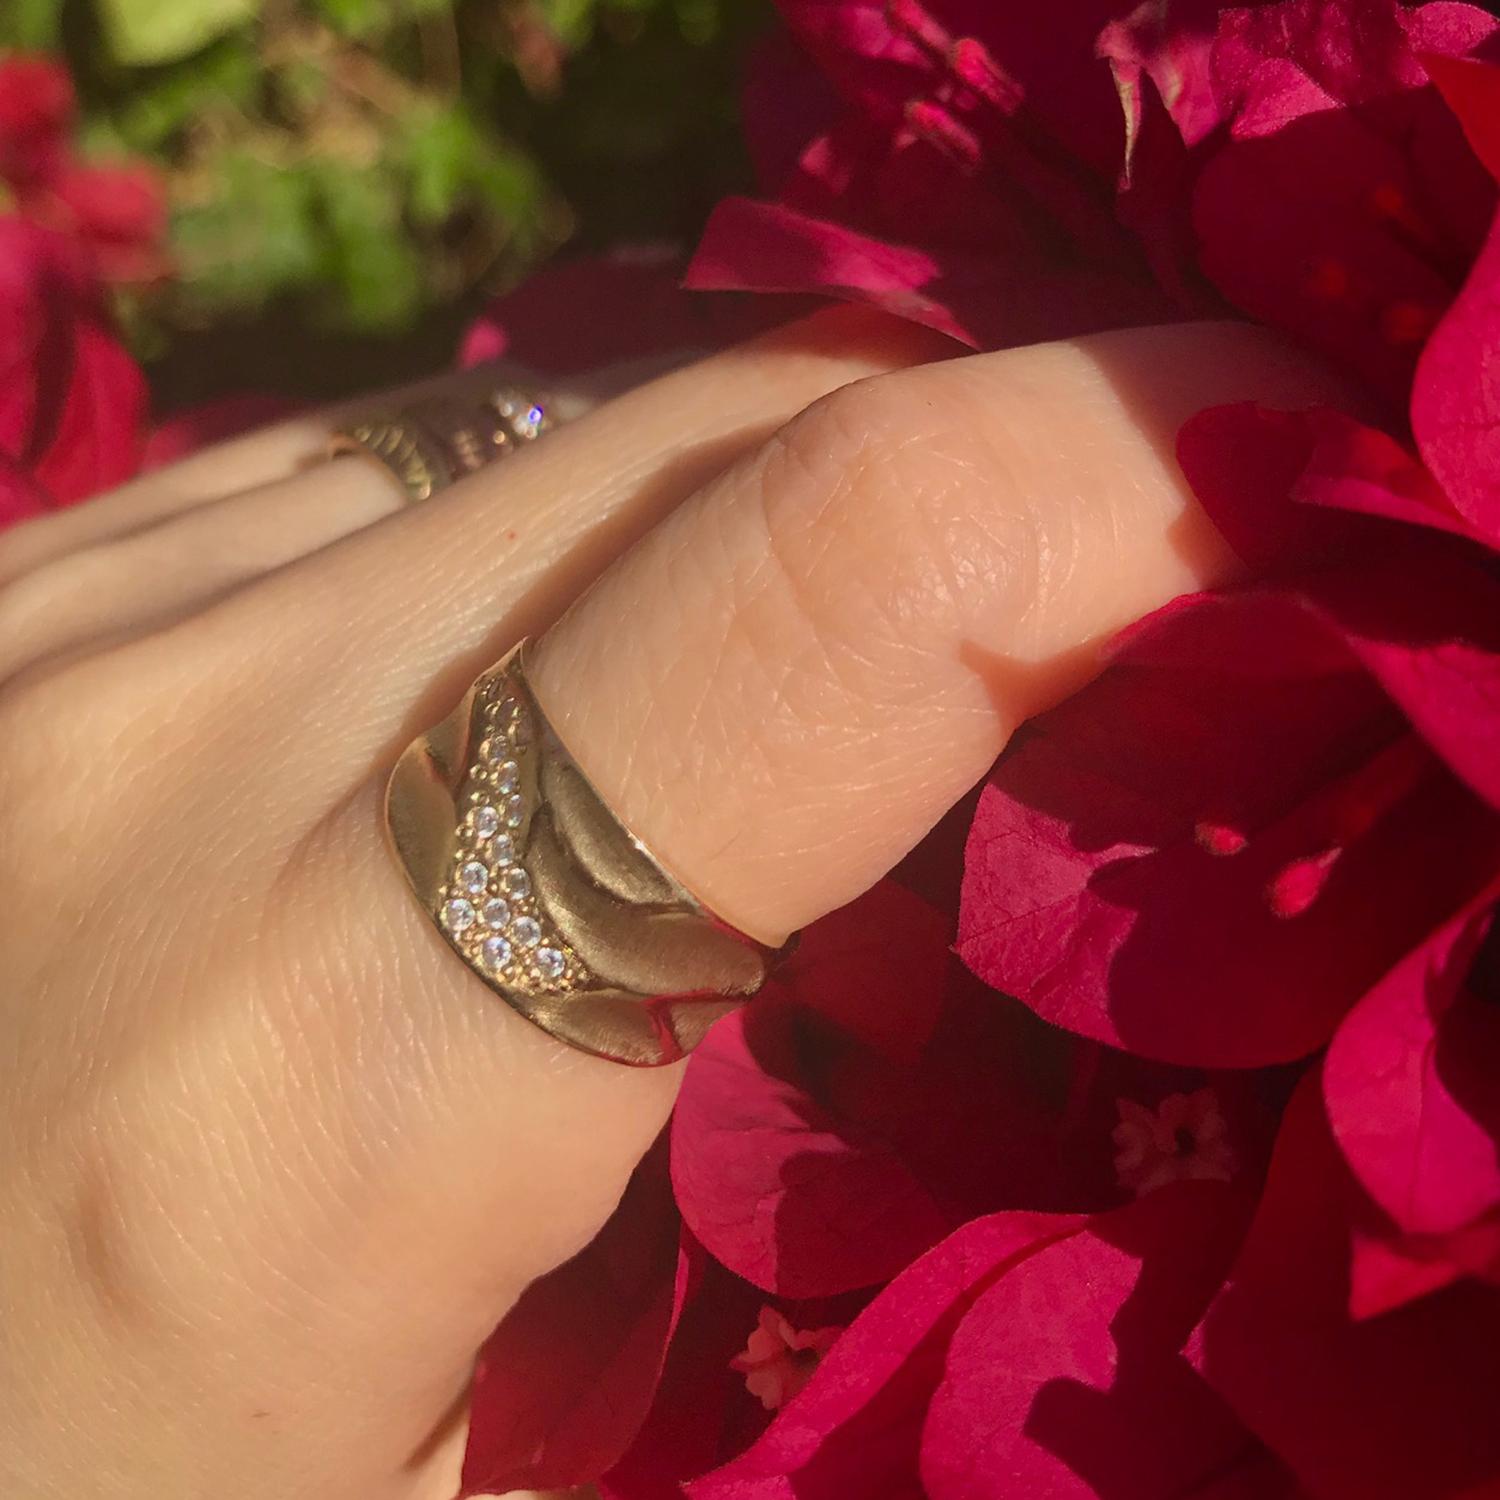 K.Mita's Wide Dune Ring has her signature Sand Dune wave and texture. It is handmade from 14 Karat Yellow Gold and 10 mm width tapered to 5 mm with  0.14 Carats white diamonds. Please allow 10-14 days for delivery as each piece is made to order.